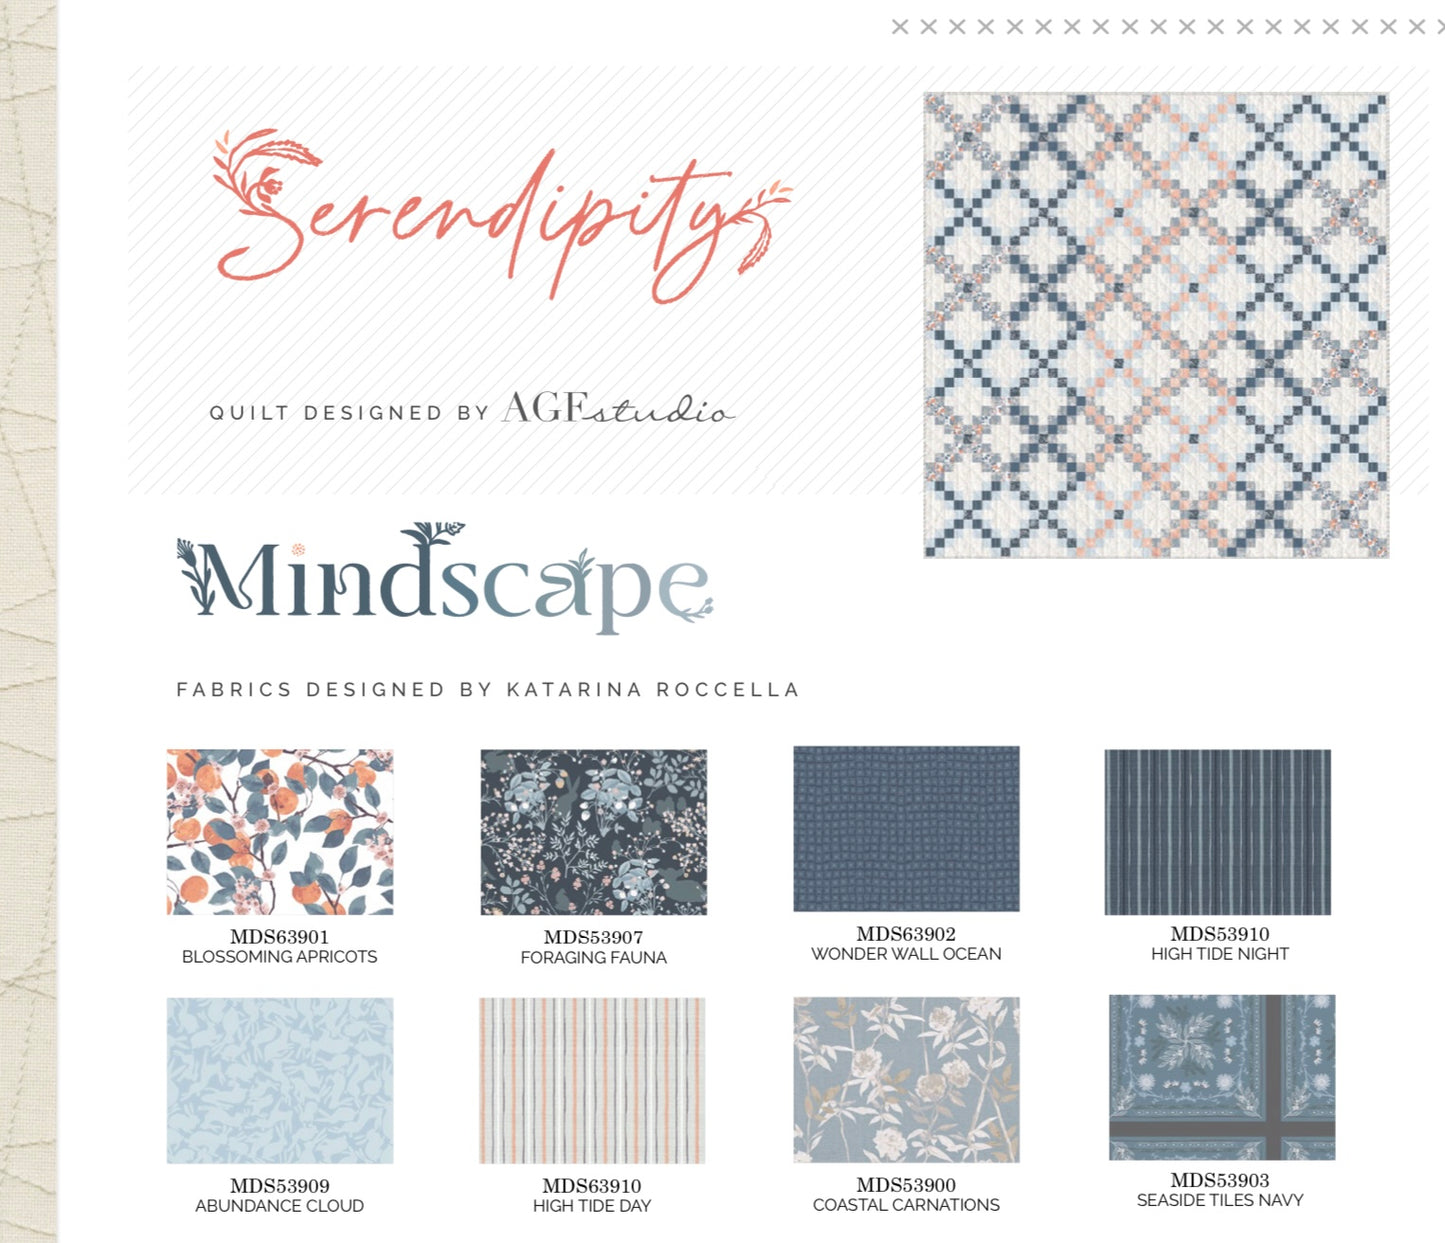 Serendipity Quilt Kit featuring Mindscape by Katarina Roccella